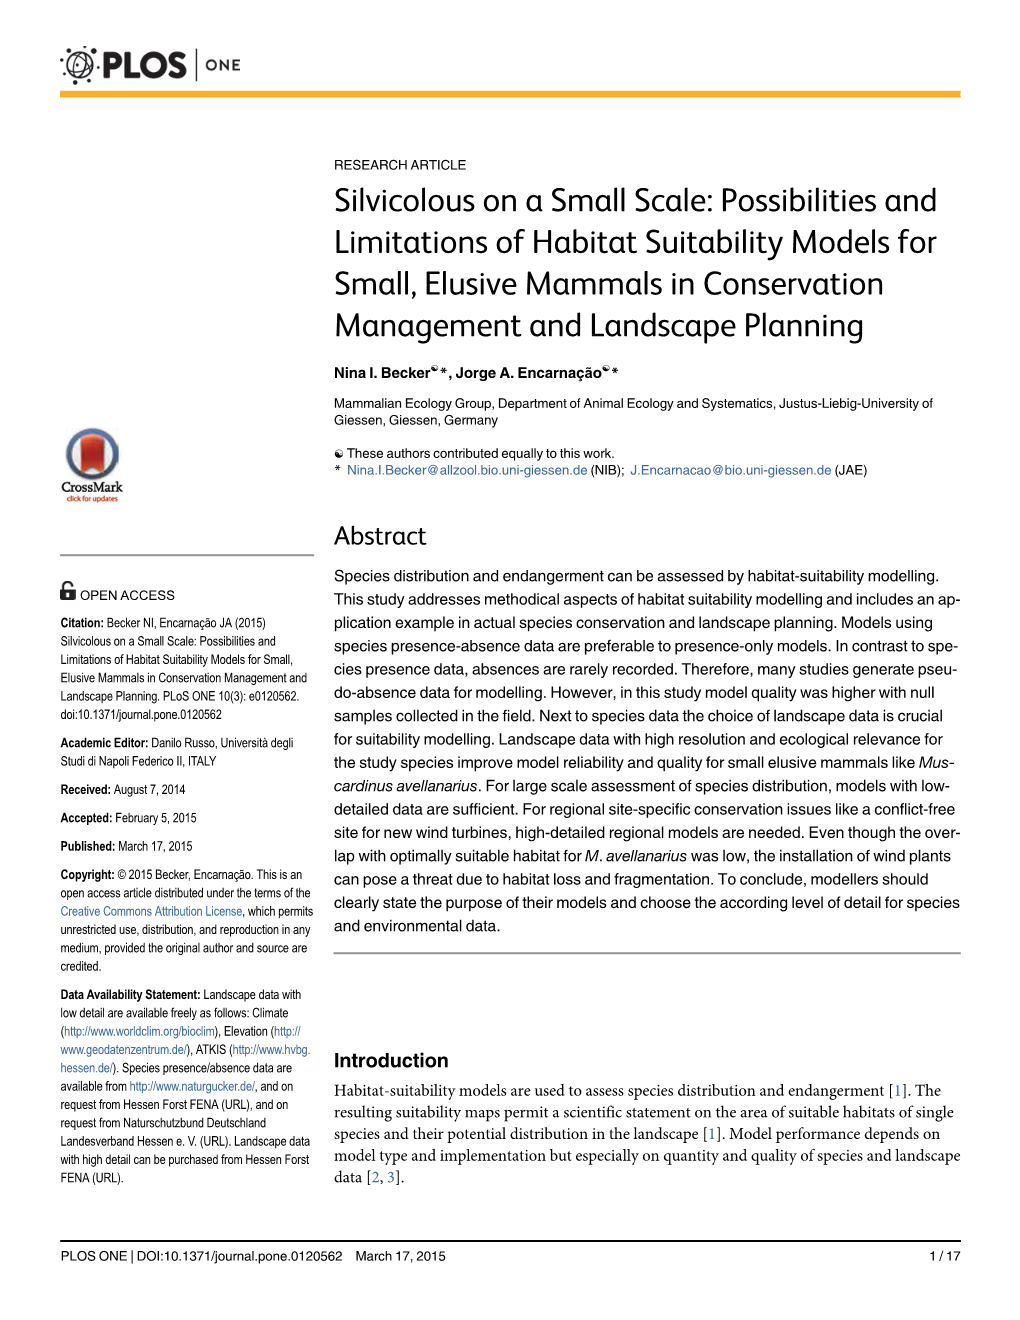 Possibilities and Limitations of Habitat Suitability Models for Small, Elusive Mammals in Conservation Management and Landscape Planning